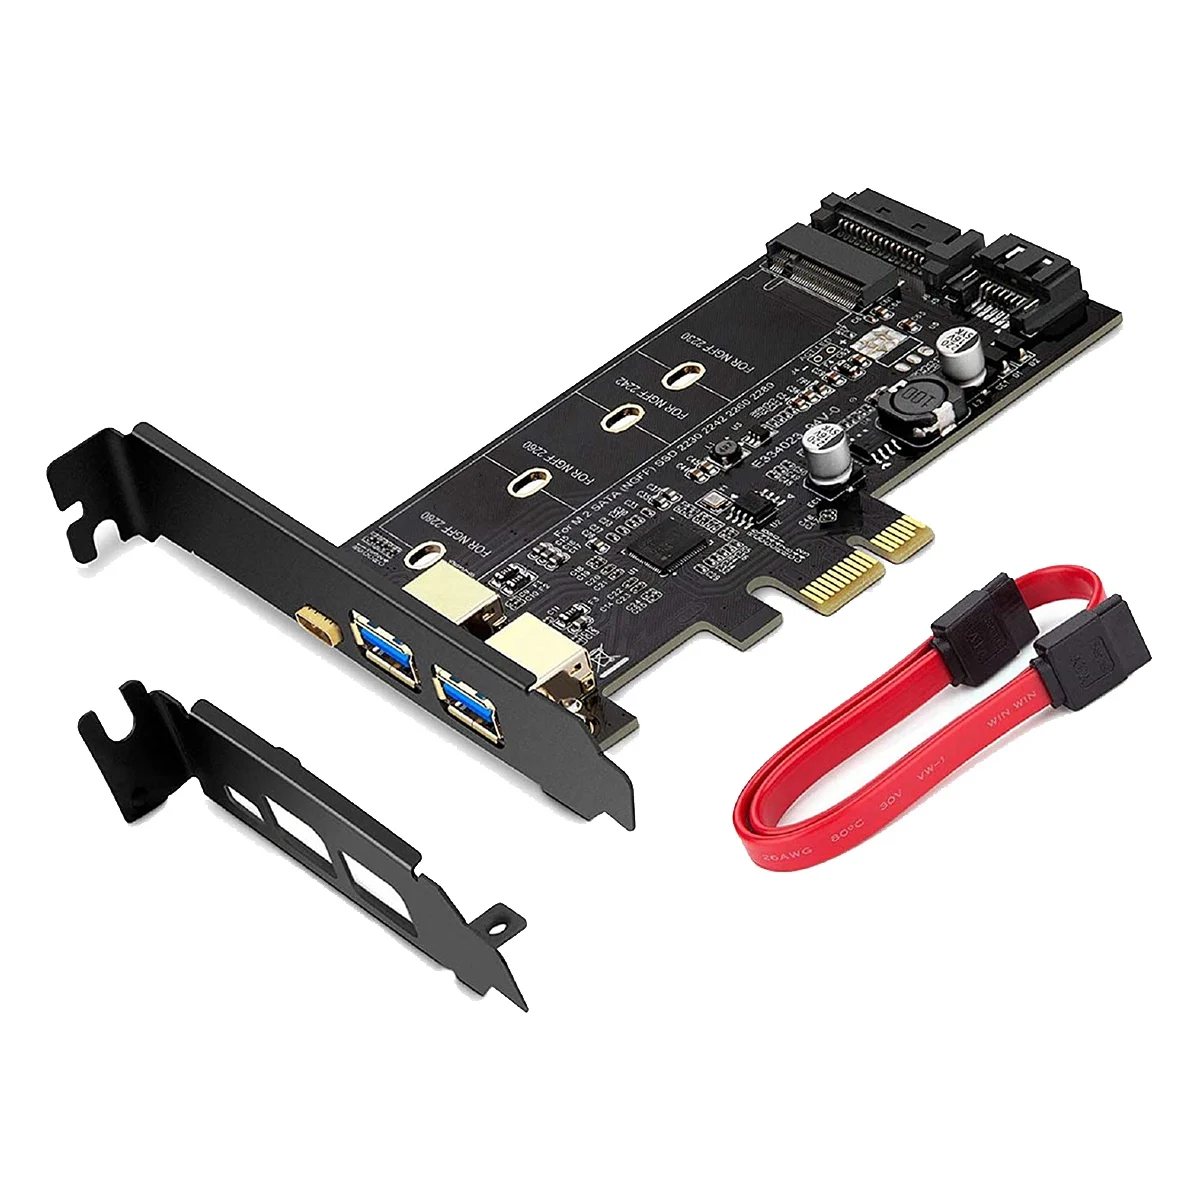 

PCI-E to USB 3.0 PCI Express Card Incl.1 USB C and 2 USB A Ports, M.2 NVME to PCIe 3.0 Adapter Card with